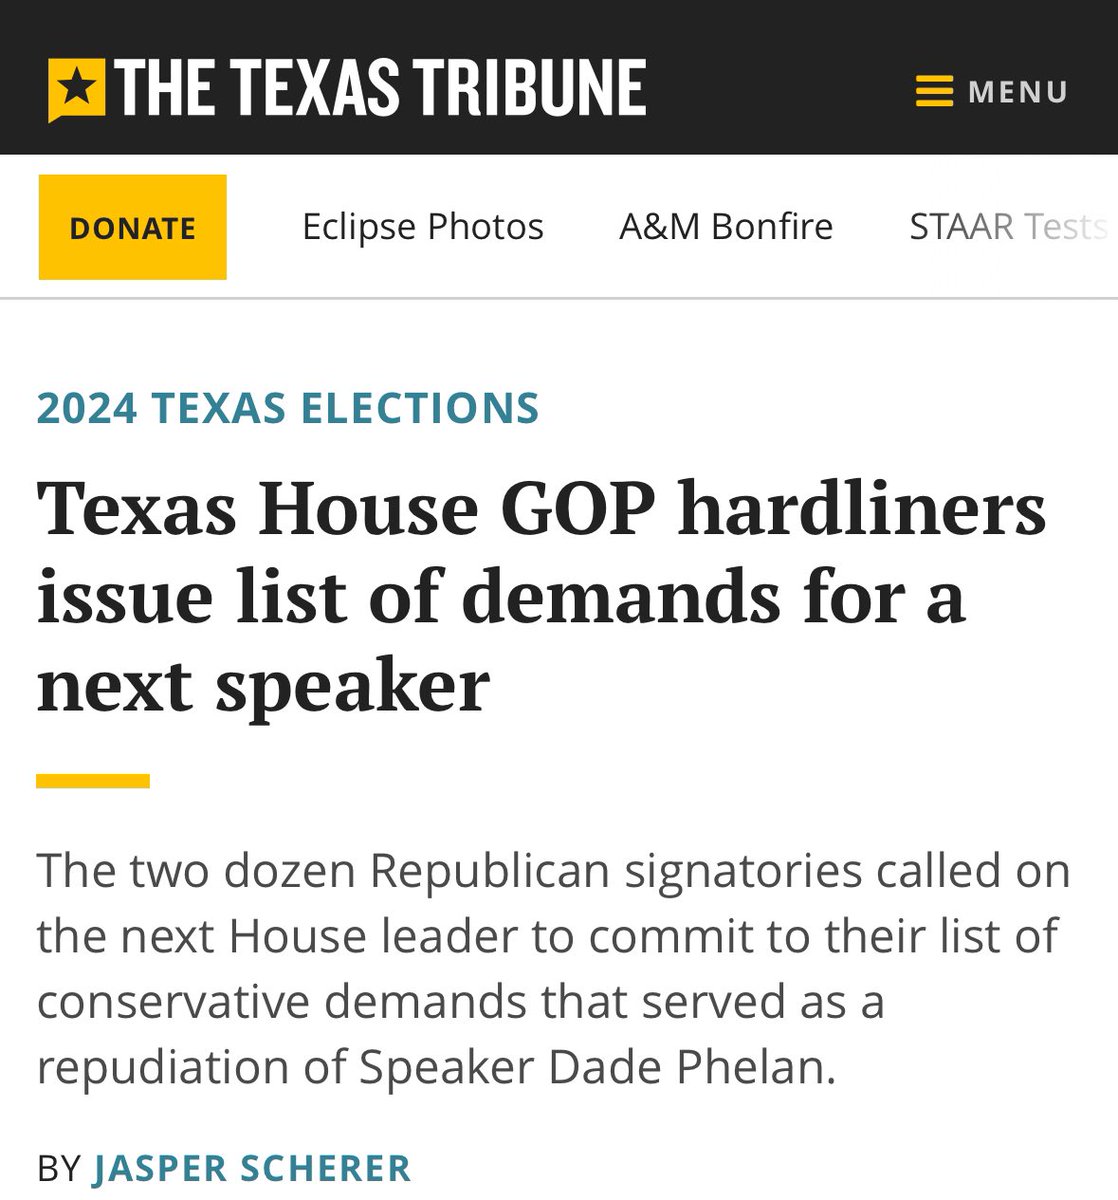 From @TexasTribune: “The letter proposes a dozen changes that, taken together, would fundamentally transform how the Texas House operates.” Yes. That is the goal. We will reform the Texas House. We will #MakeTheTexasHouseRepublicanAgain. #txlege